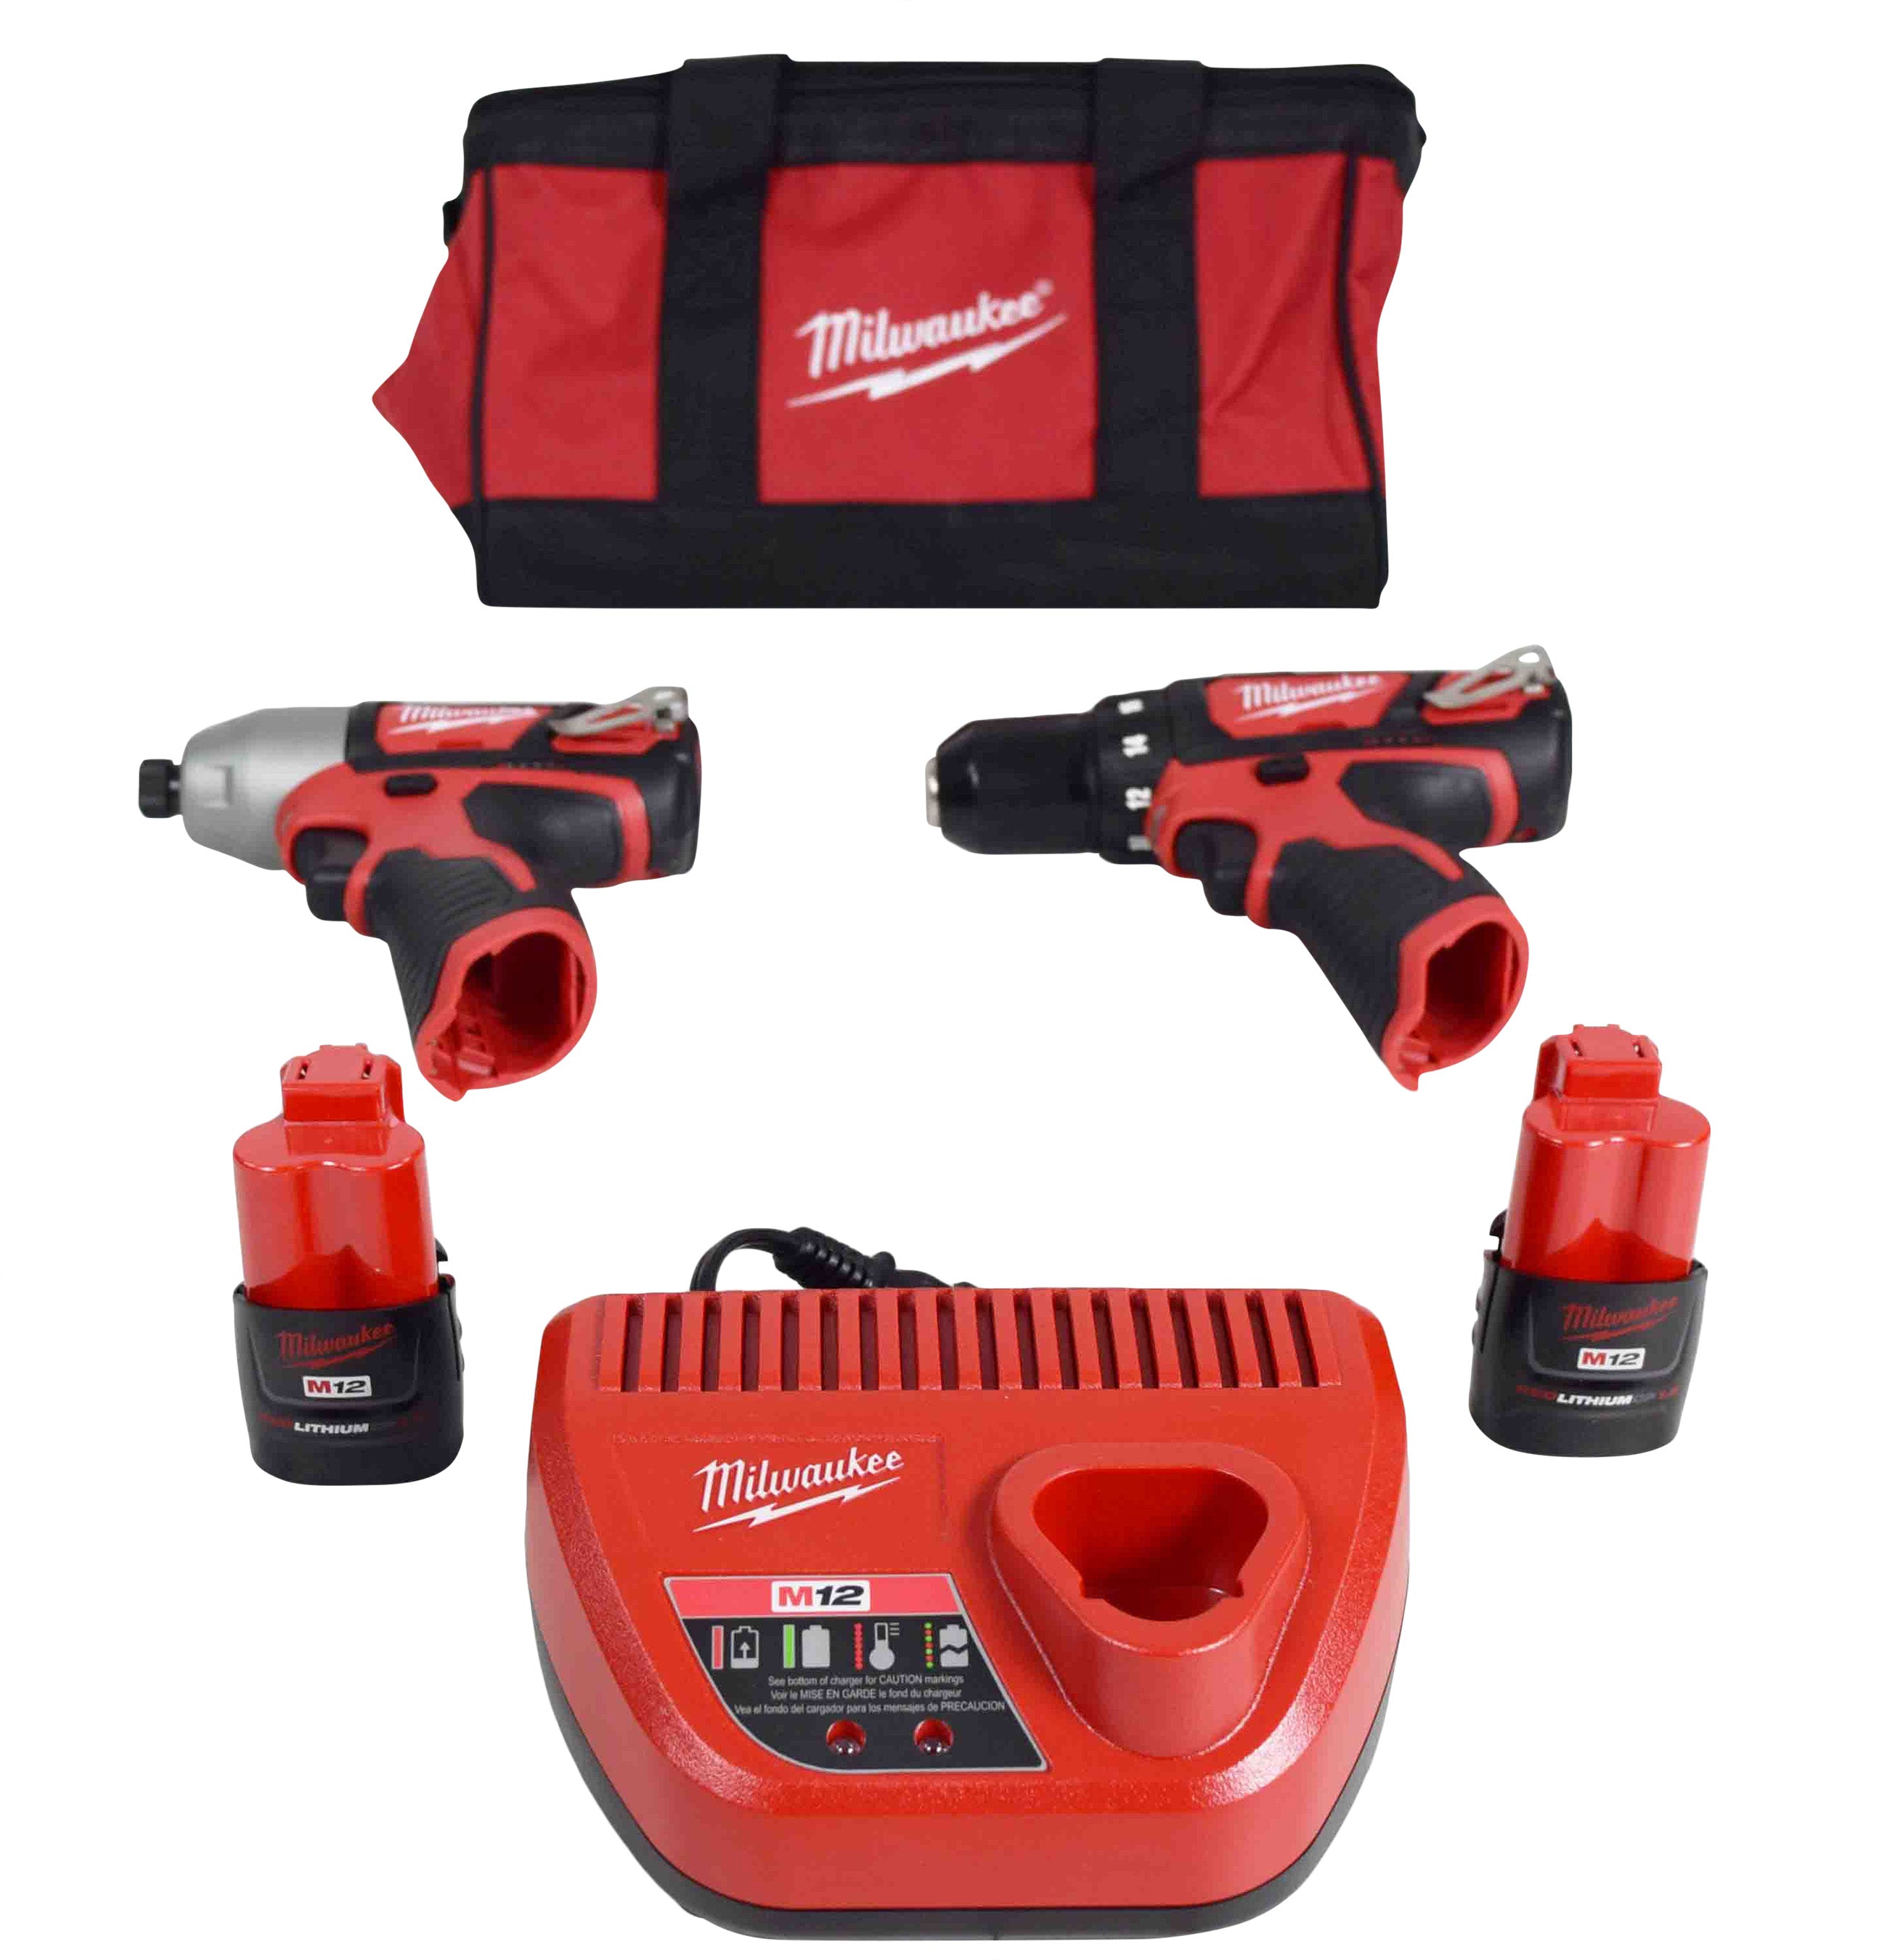 Milwaukee-2494-22-M12-Cordless-Combination-3-8-Drill-Driver-and-1-4-Hex-Impact-Driver-Dual-Power-Tool-Kit-2-Lithium-Ion-Batteries-Charger-and-Bag-Included-image-1